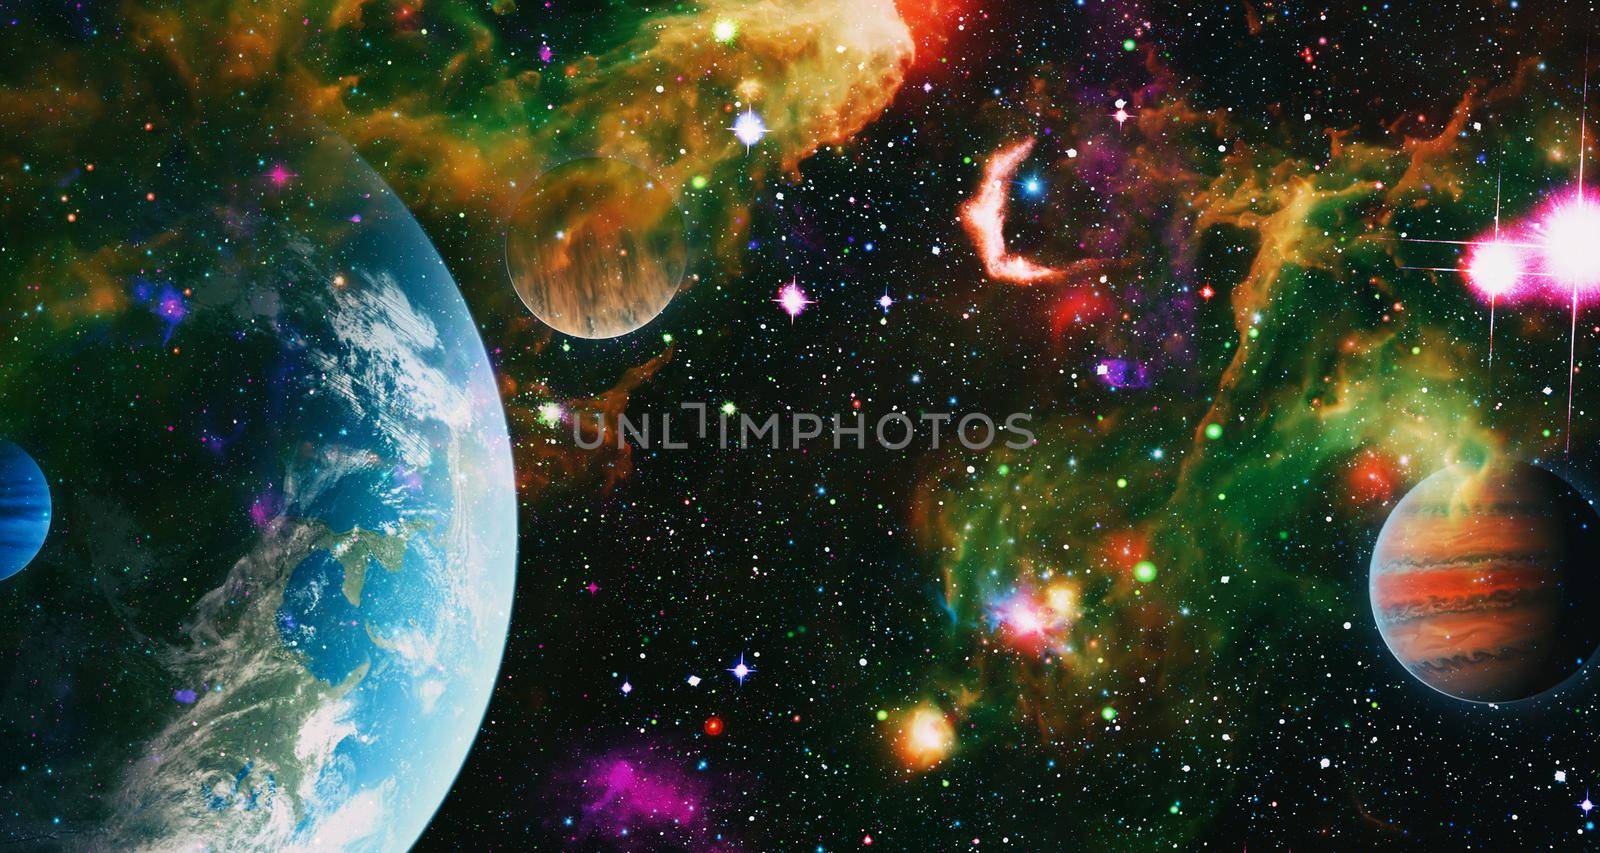 High quality space background. Bright Star Nebula. Distant galaxy. Abstract image. Elements of this image furnished by NASA.